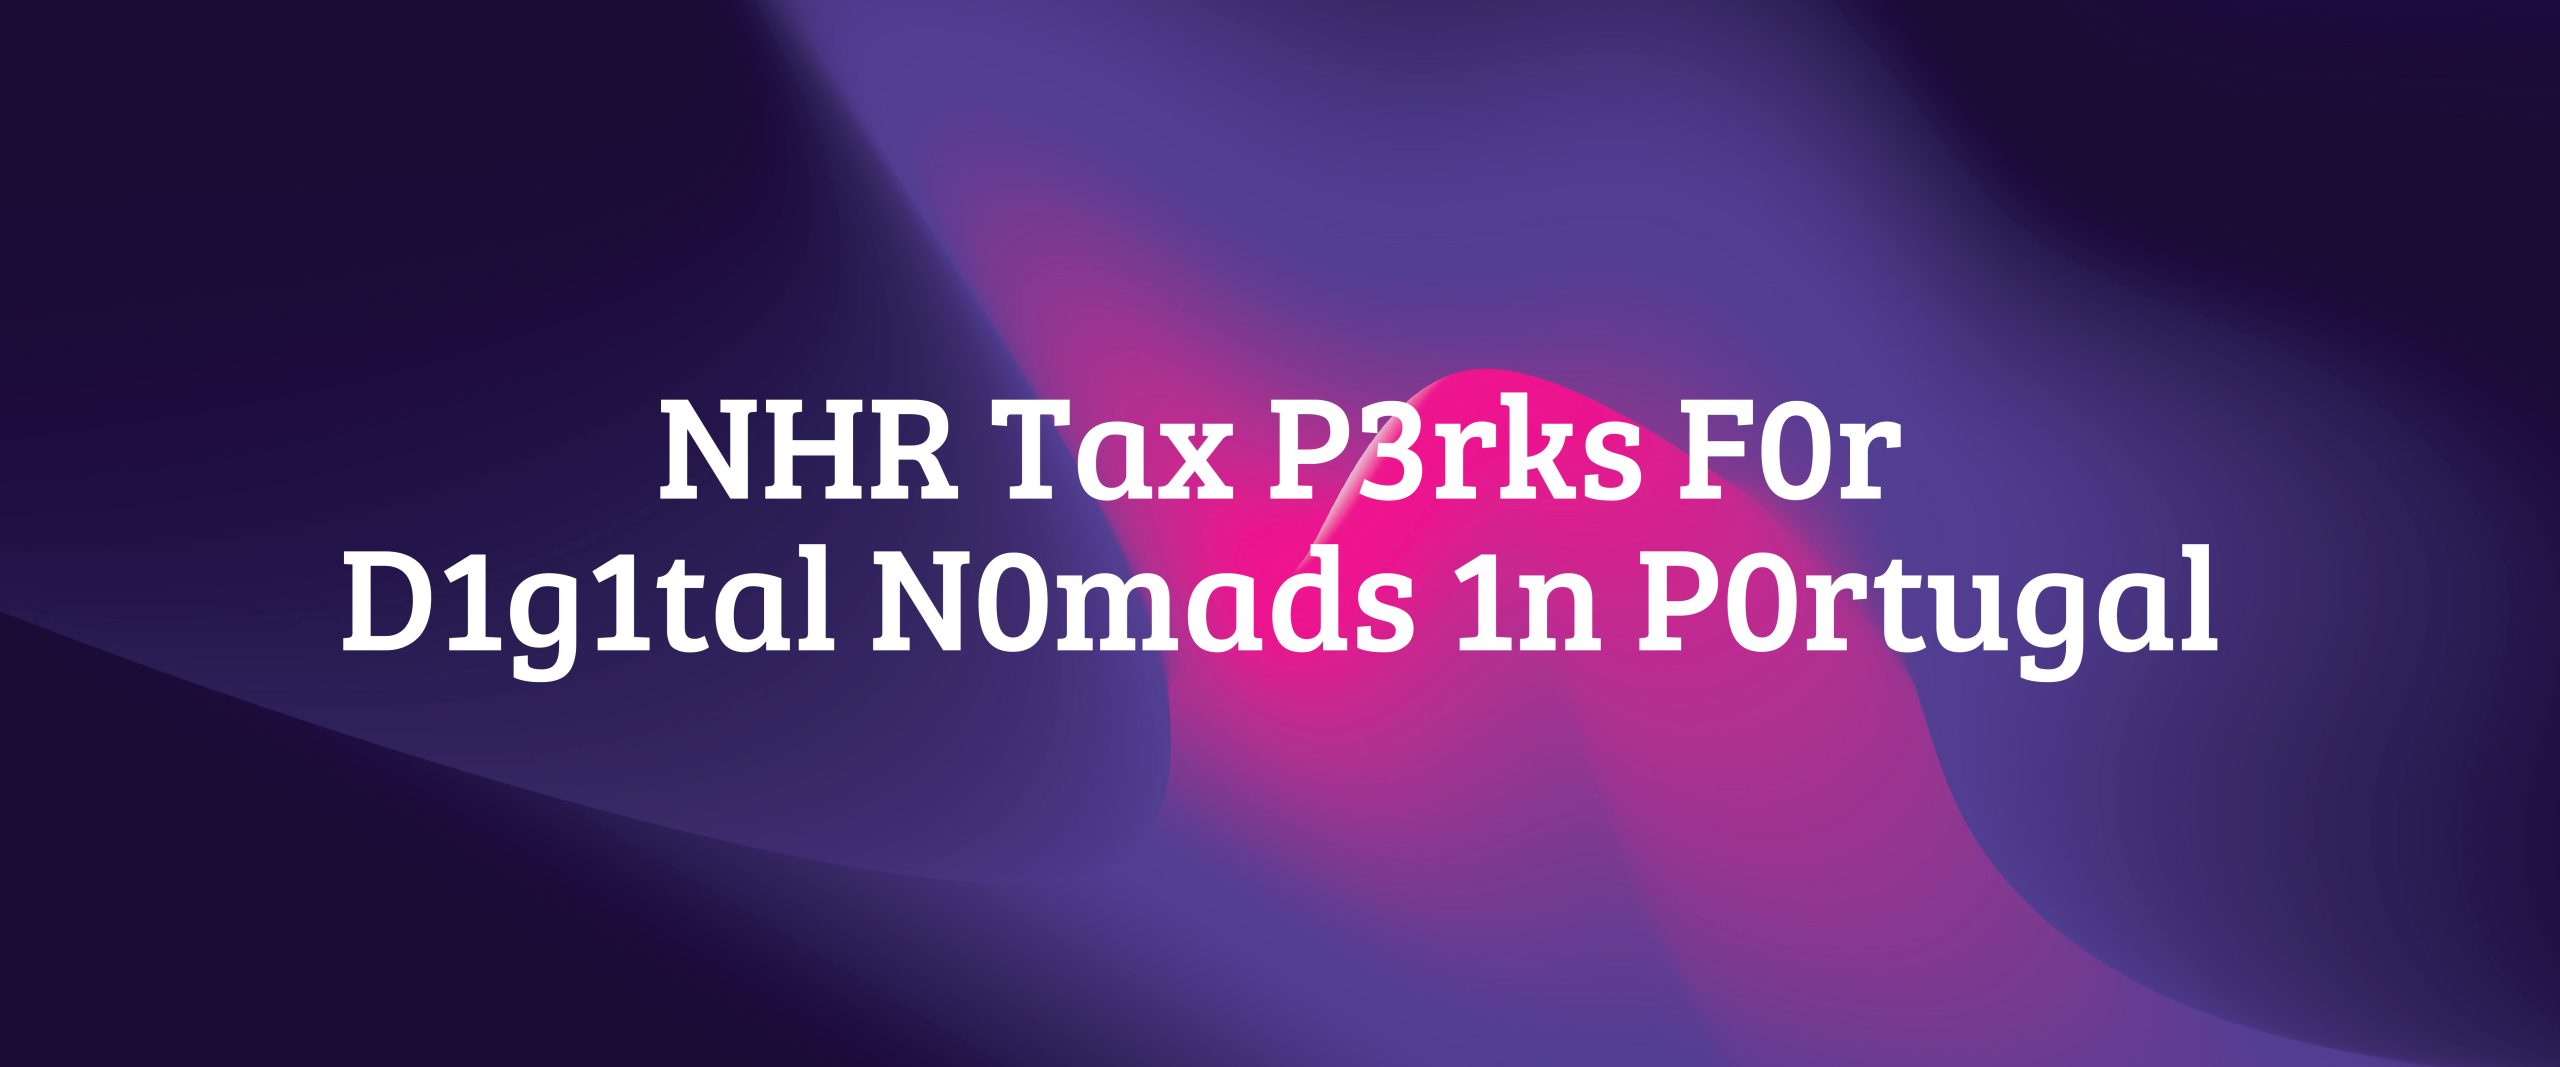 NHR Tax Perks For Digital Nomads In Portugal